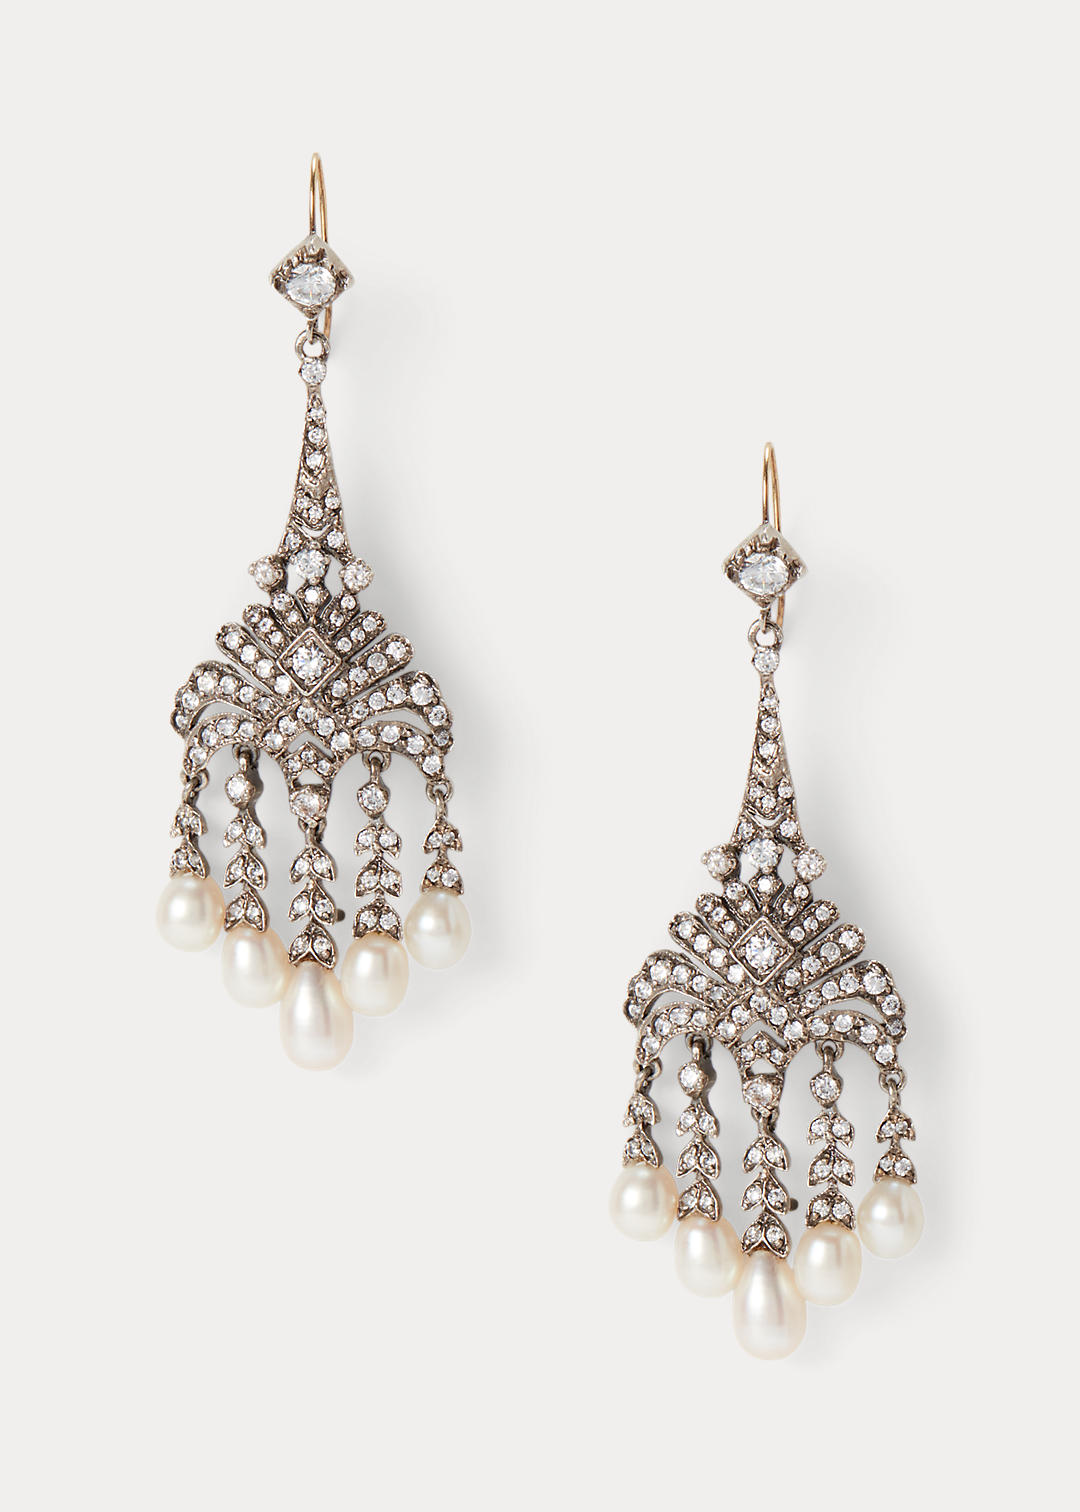 Ralph Lauren Collection Pearl and Crystal Chandelier Earrings 1